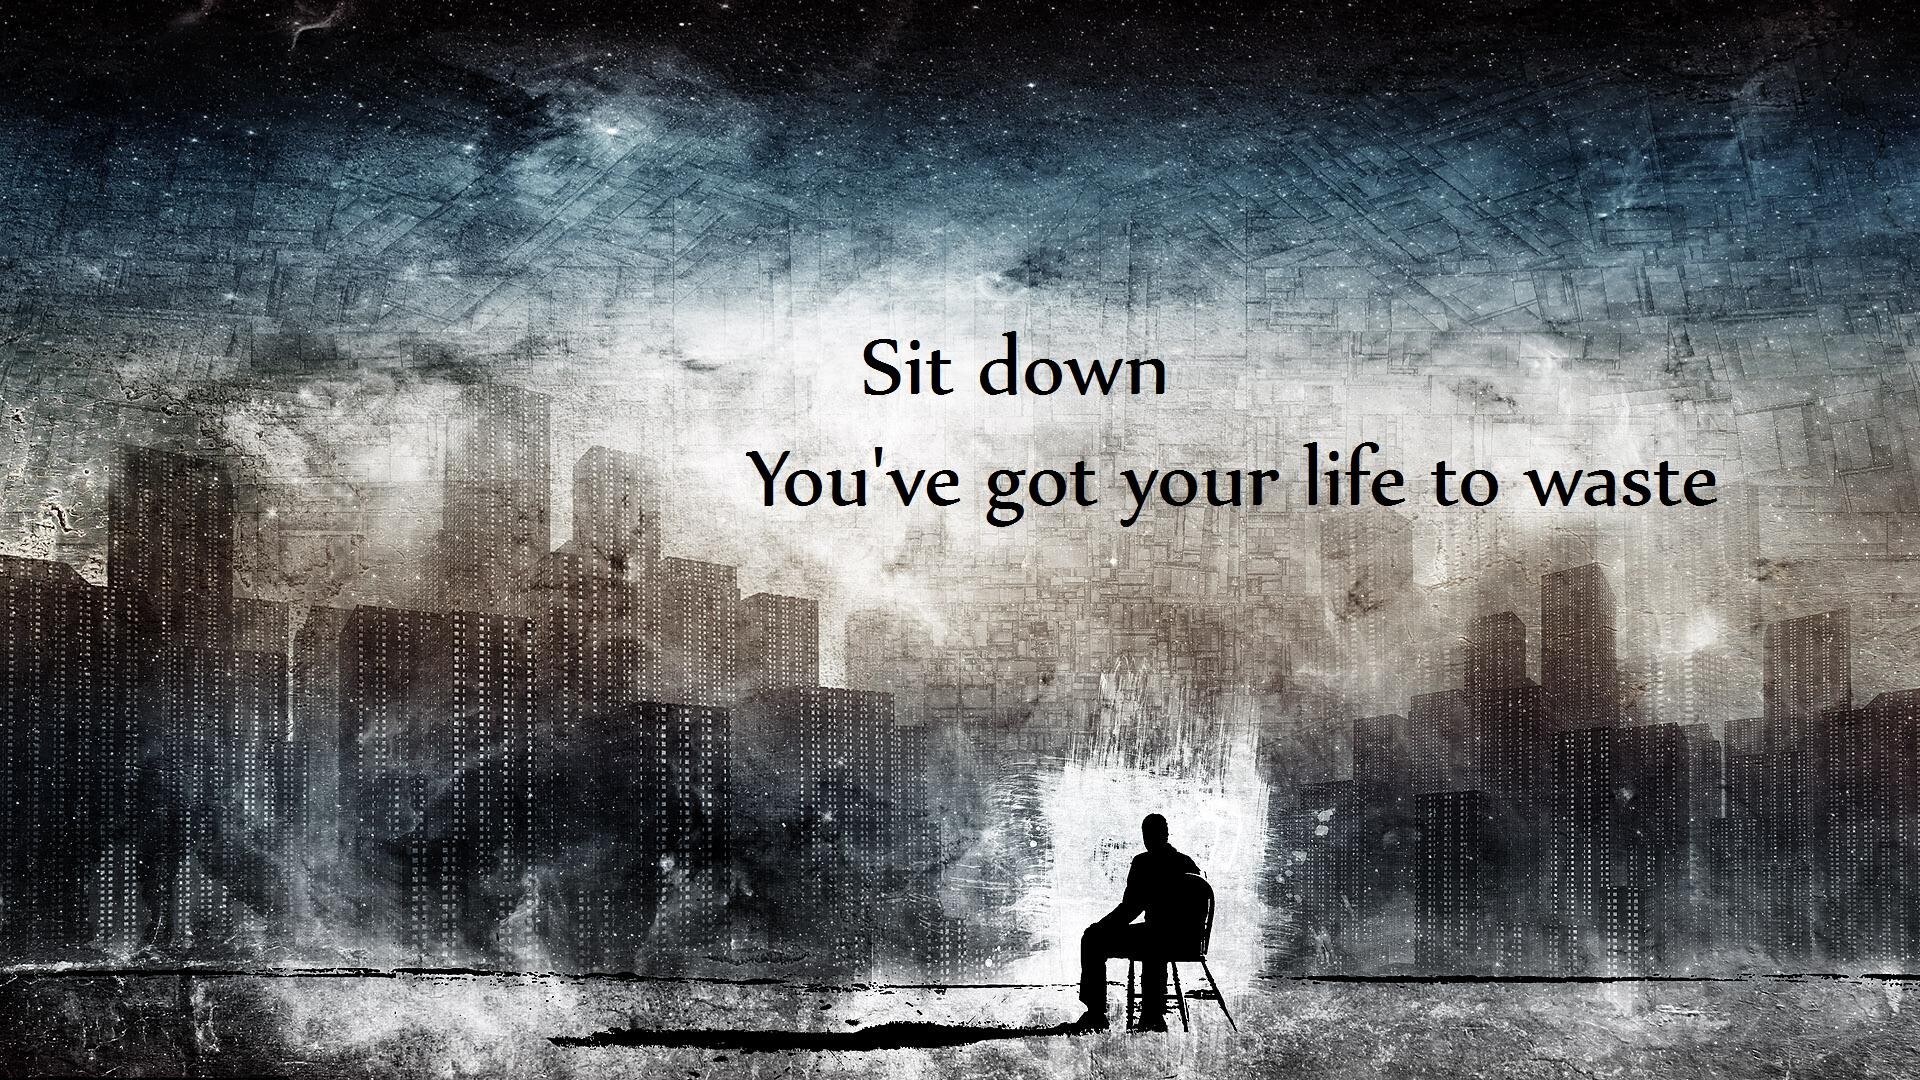 life-to-waste-1920x1080.jpg